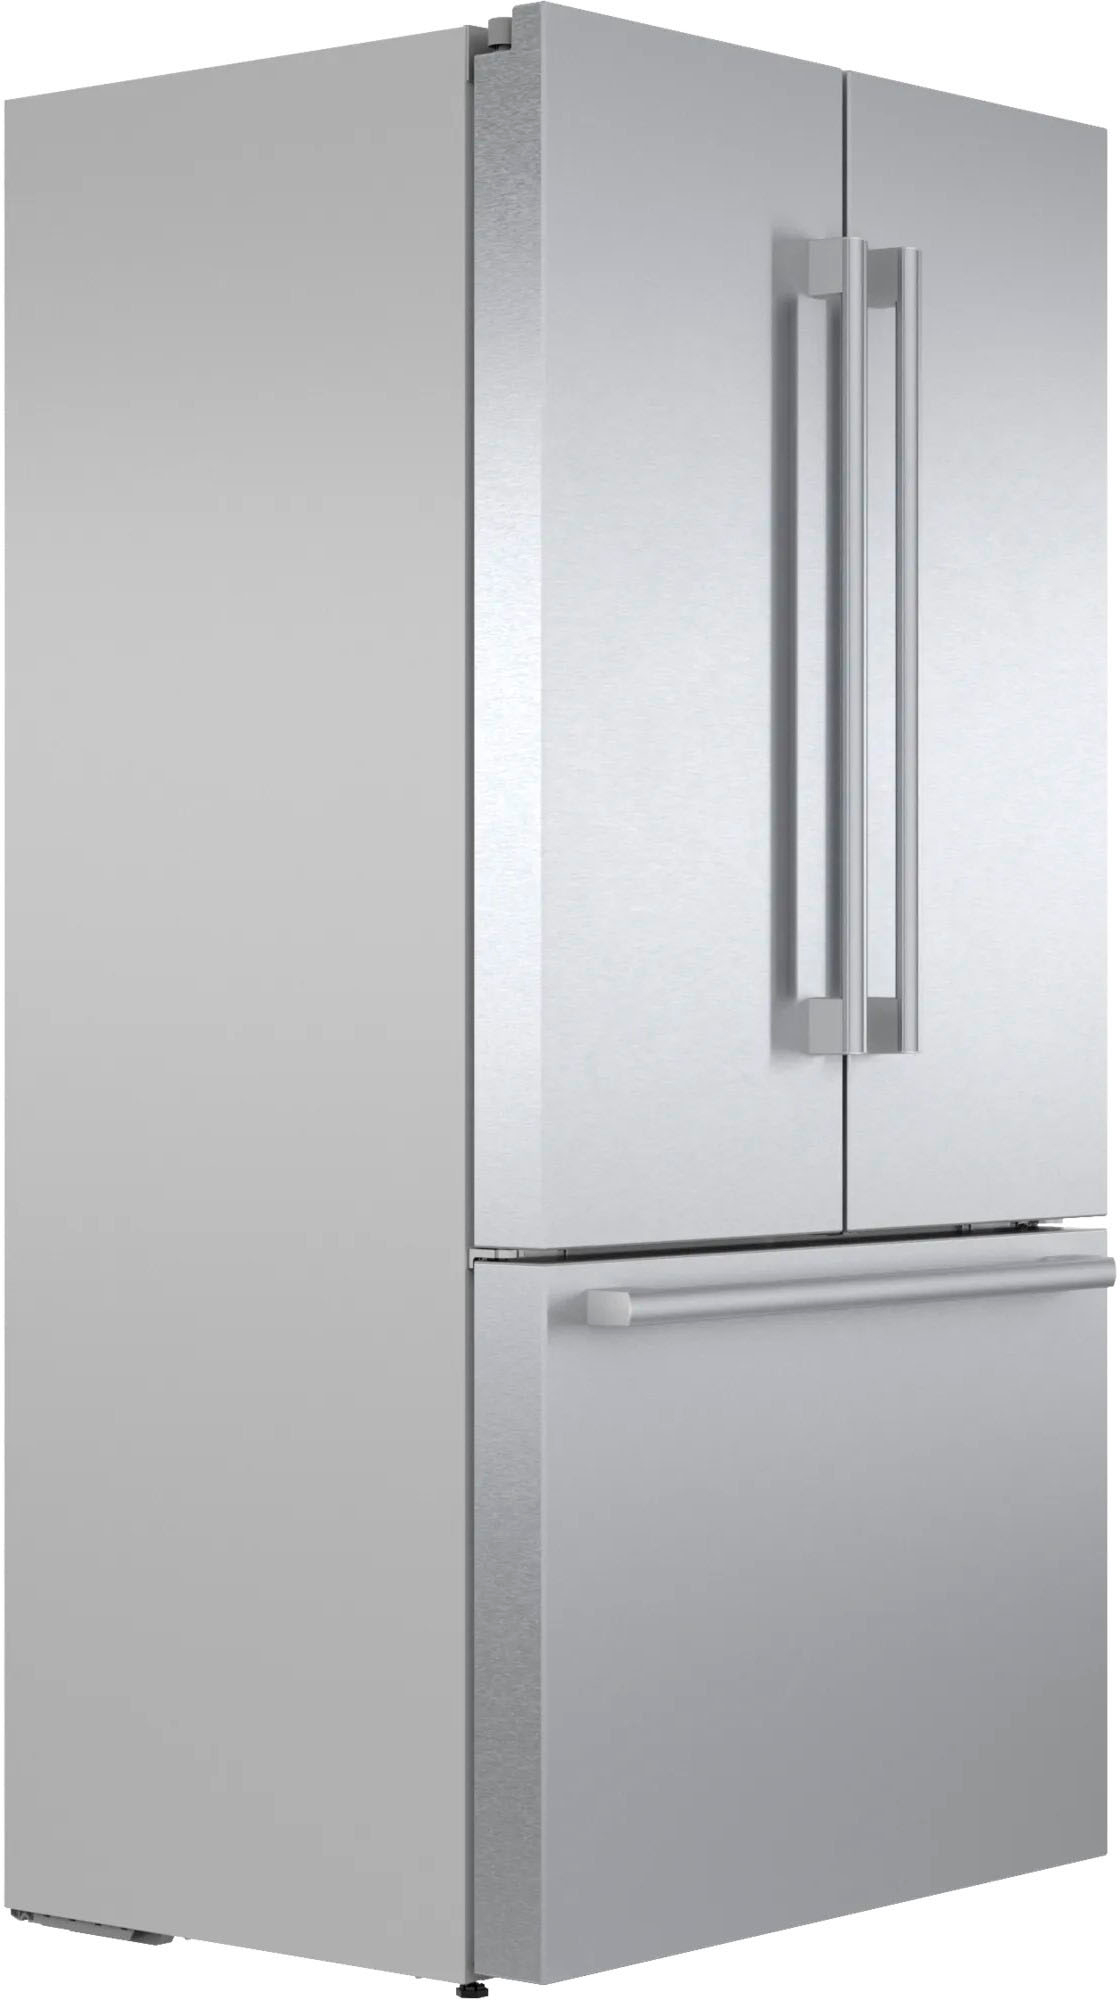 Angle View: Fisher & Paykel - 13 1/2 Cu. Ft. Bottom-Freezer Counter-Depth Refrigerator - Stainless steel